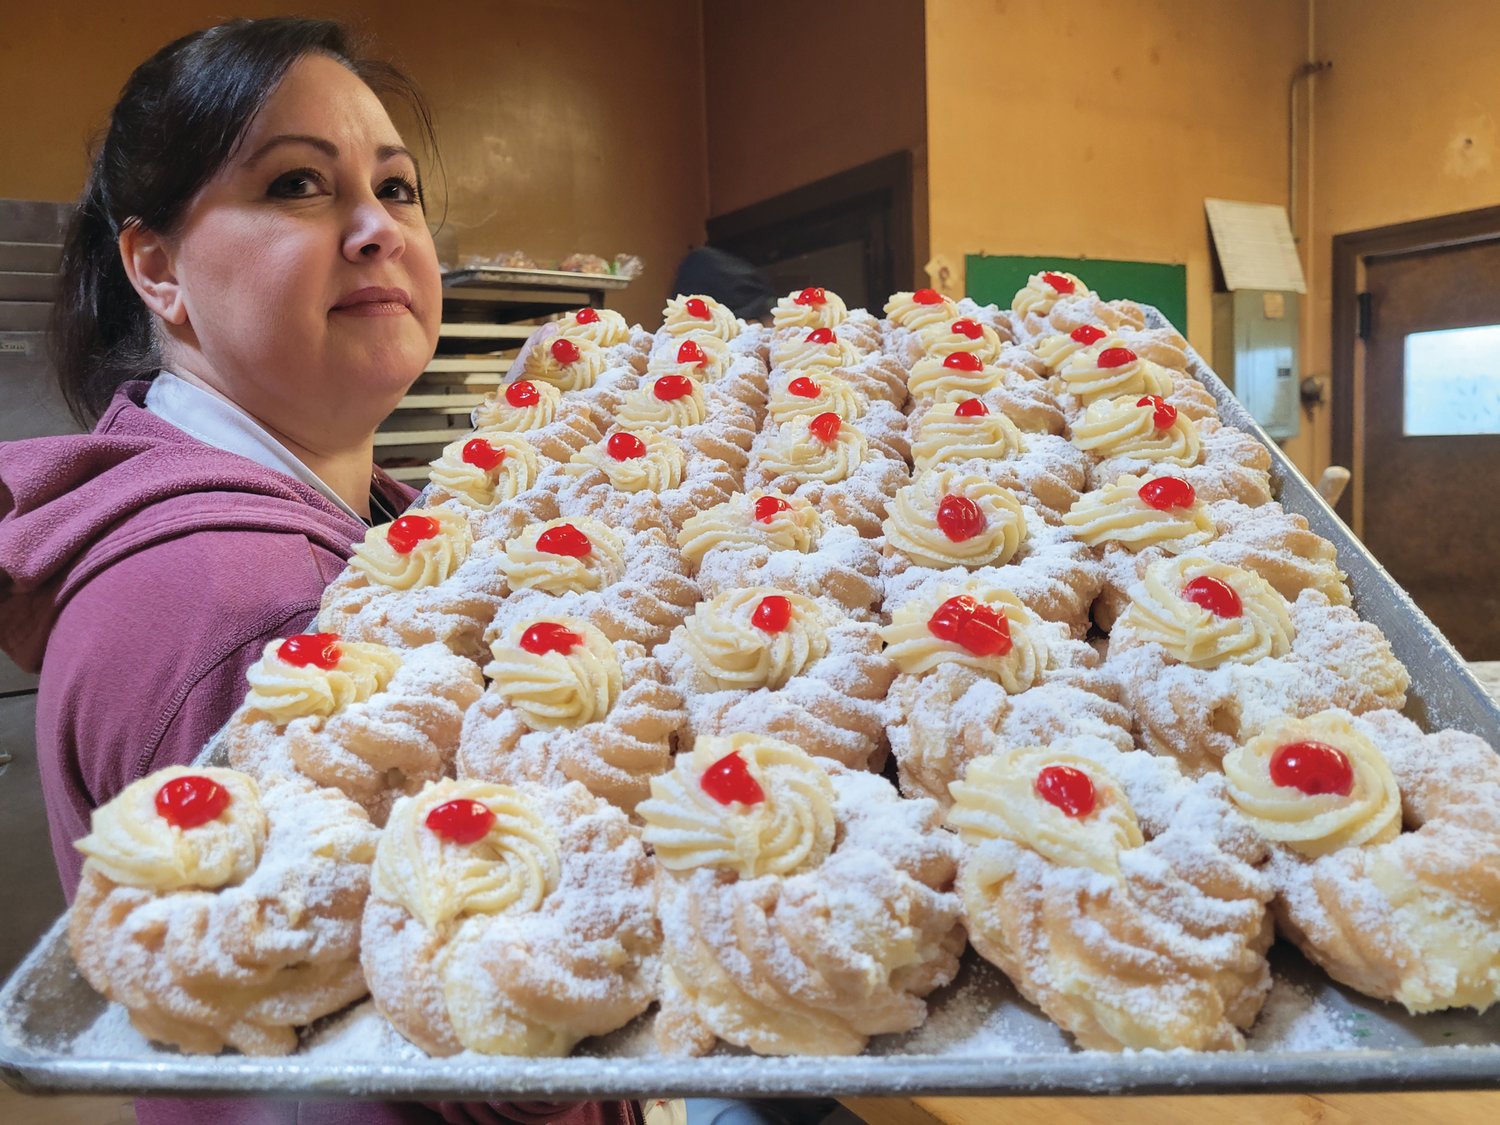 FULLY STOCKED: Diane Notarianni carries a tray of finished zeppoles from the kitchen to the display cases at Solitro’s Bakery, 1594 Cranston St., Cranston.